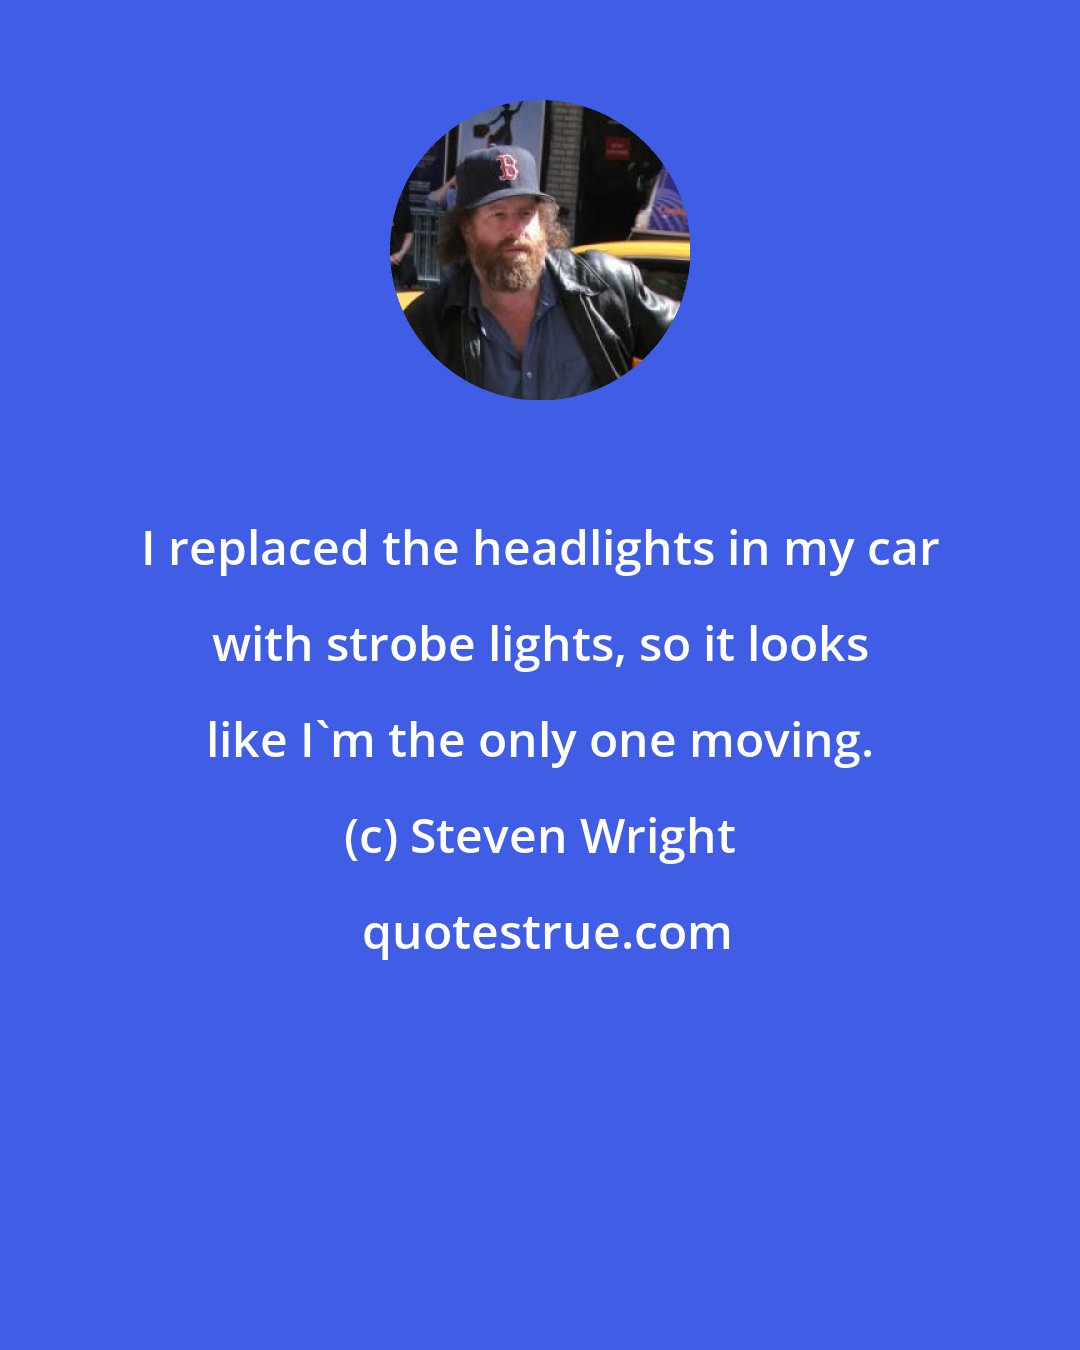 Steven Wright: I replaced the headlights in my car with strobe lights, so it looks like I'm the only one moving.